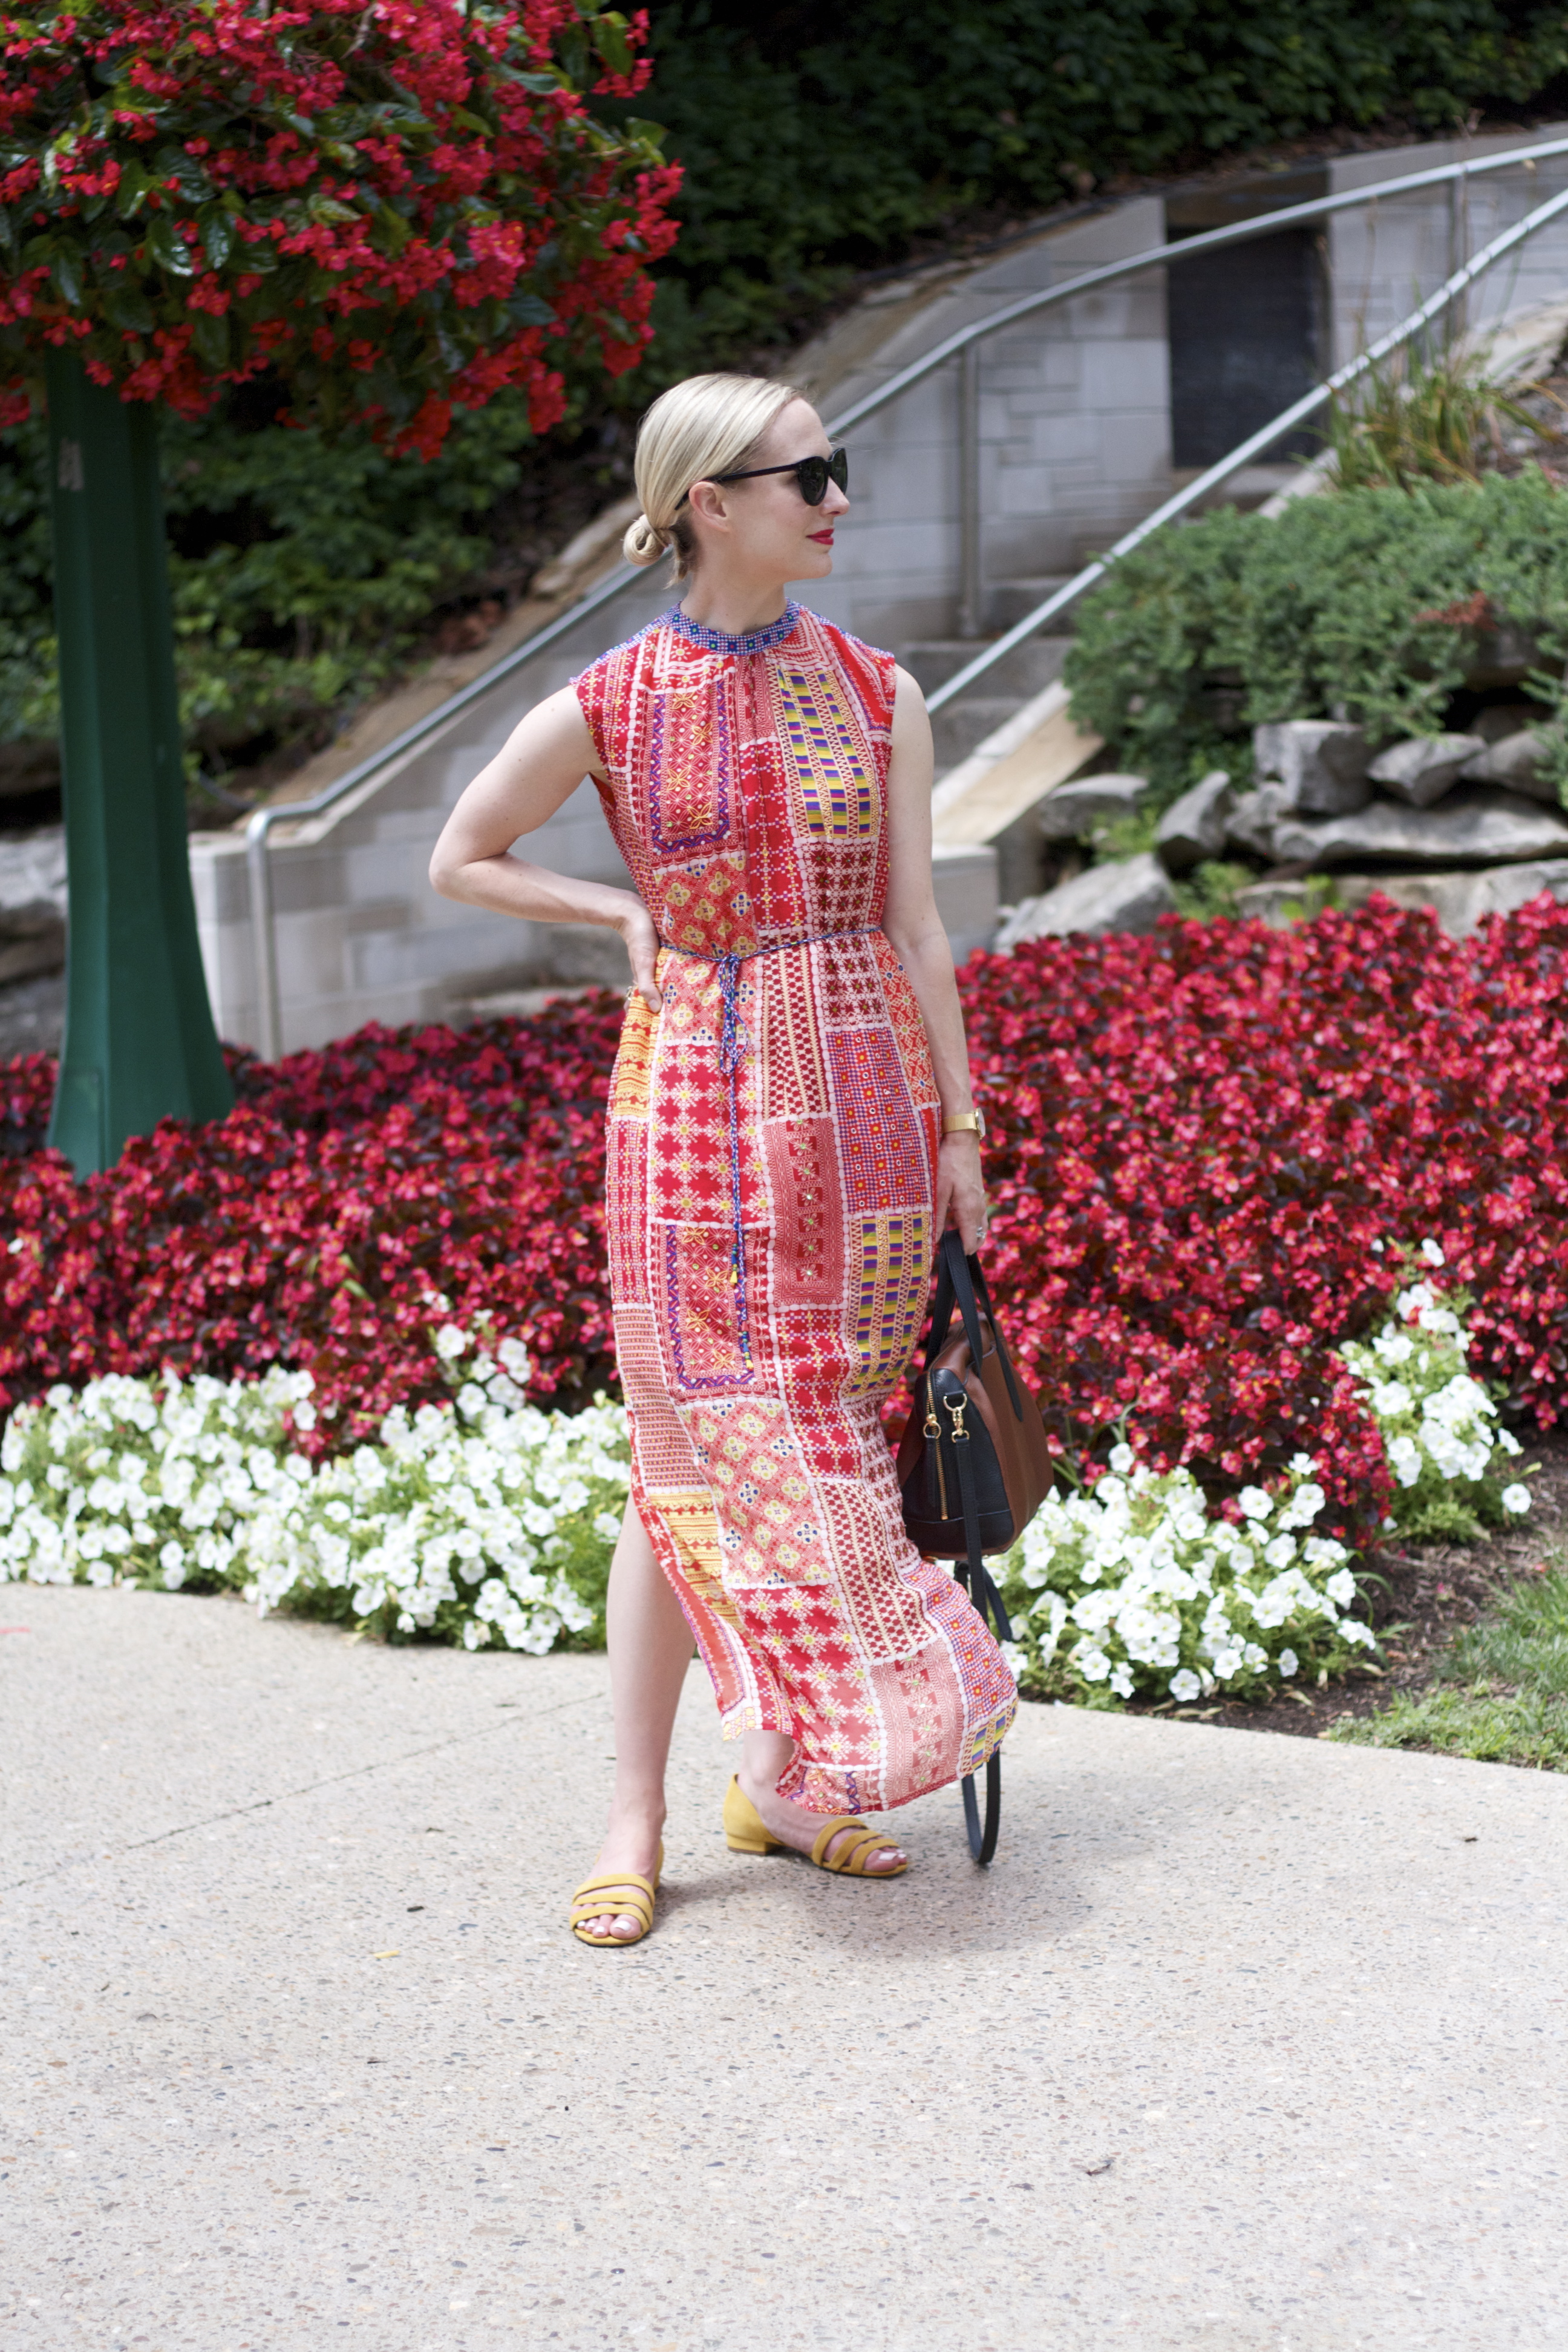 anthropologie maxi dress, silky maxi dress outfit, Madewell suede sandals, Cole Haan sunglasses